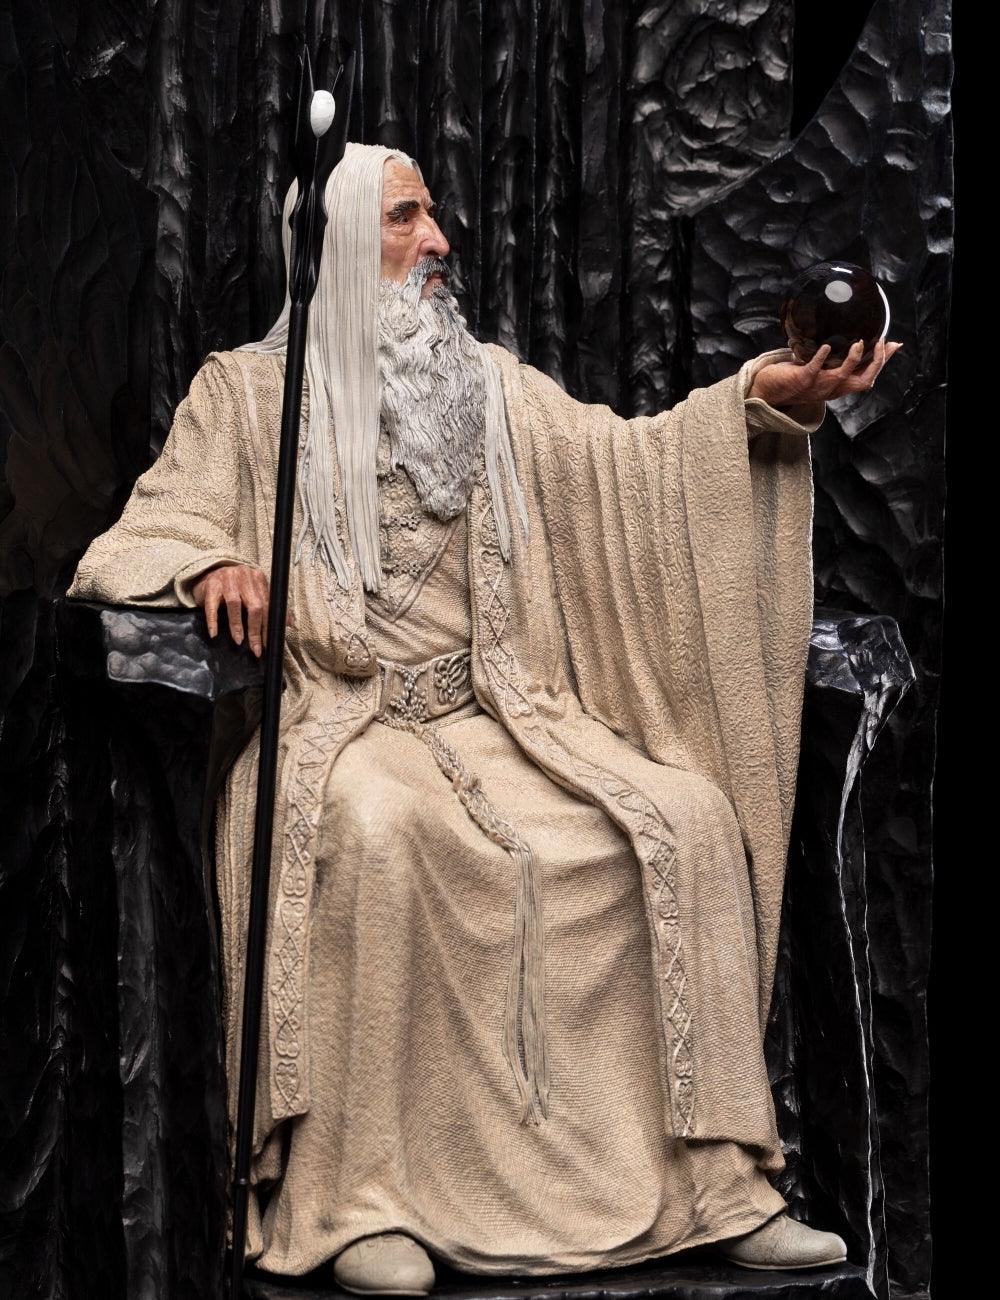 WET03269 The Lord of the Rings - Saruman the White on Throne 1:6 Scale Statue - Weta Workshop - Titan Pop Culture